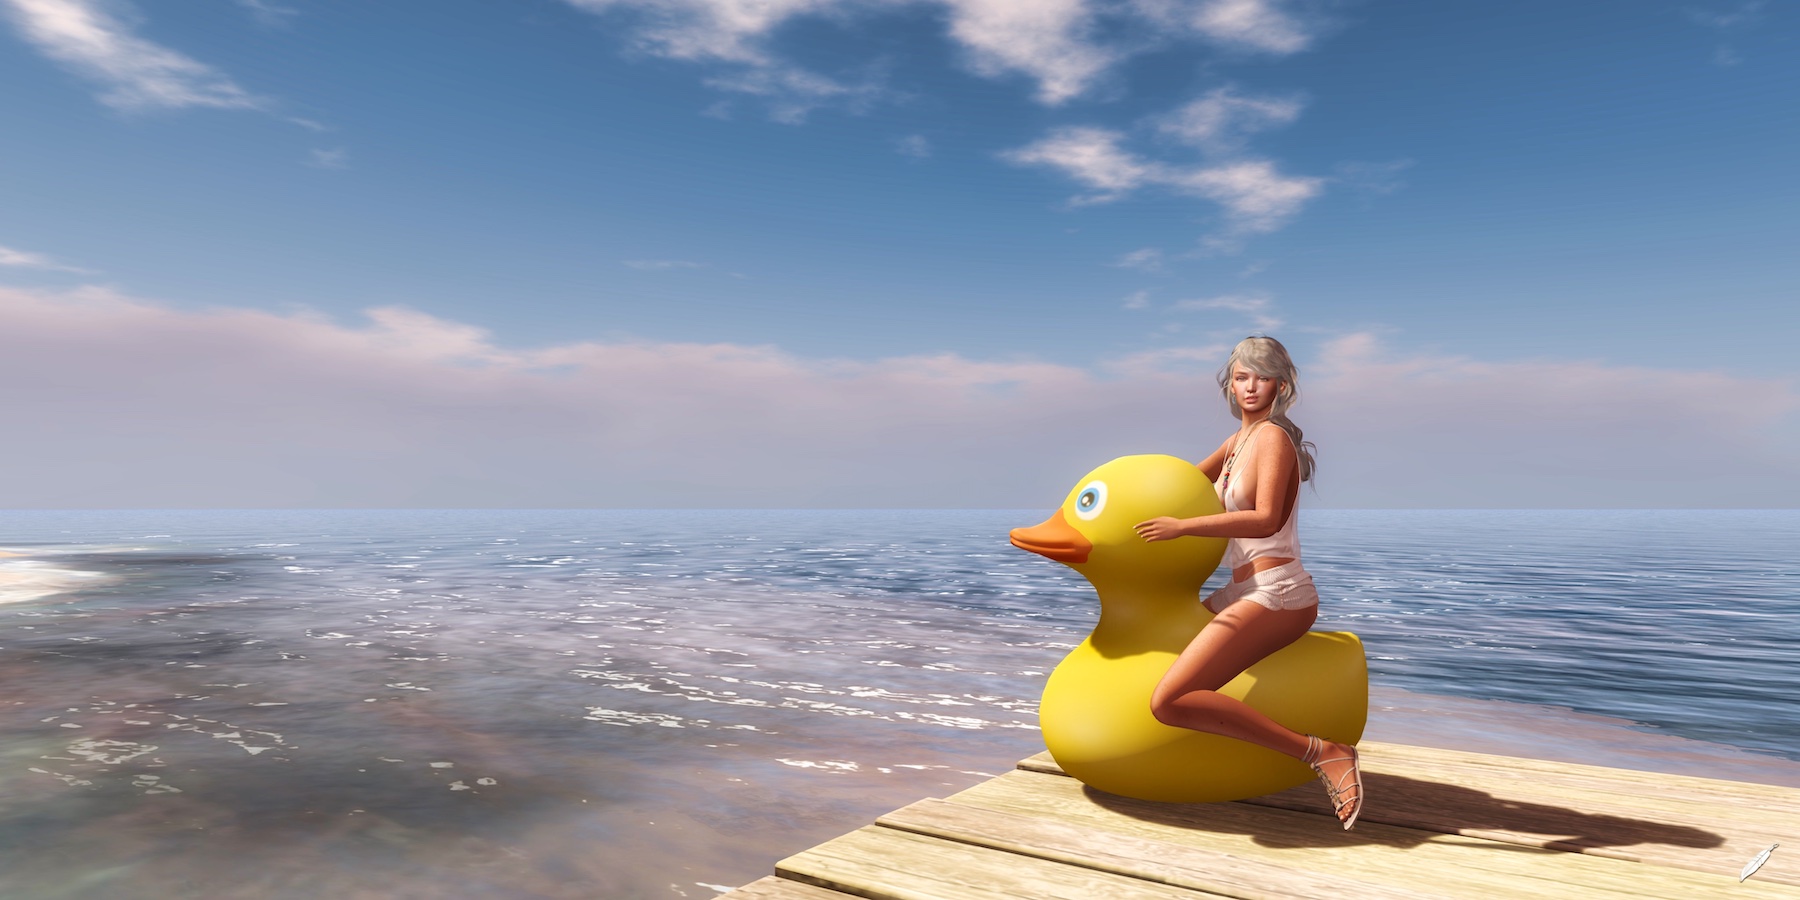 Sitting On The Duck Of The Bay